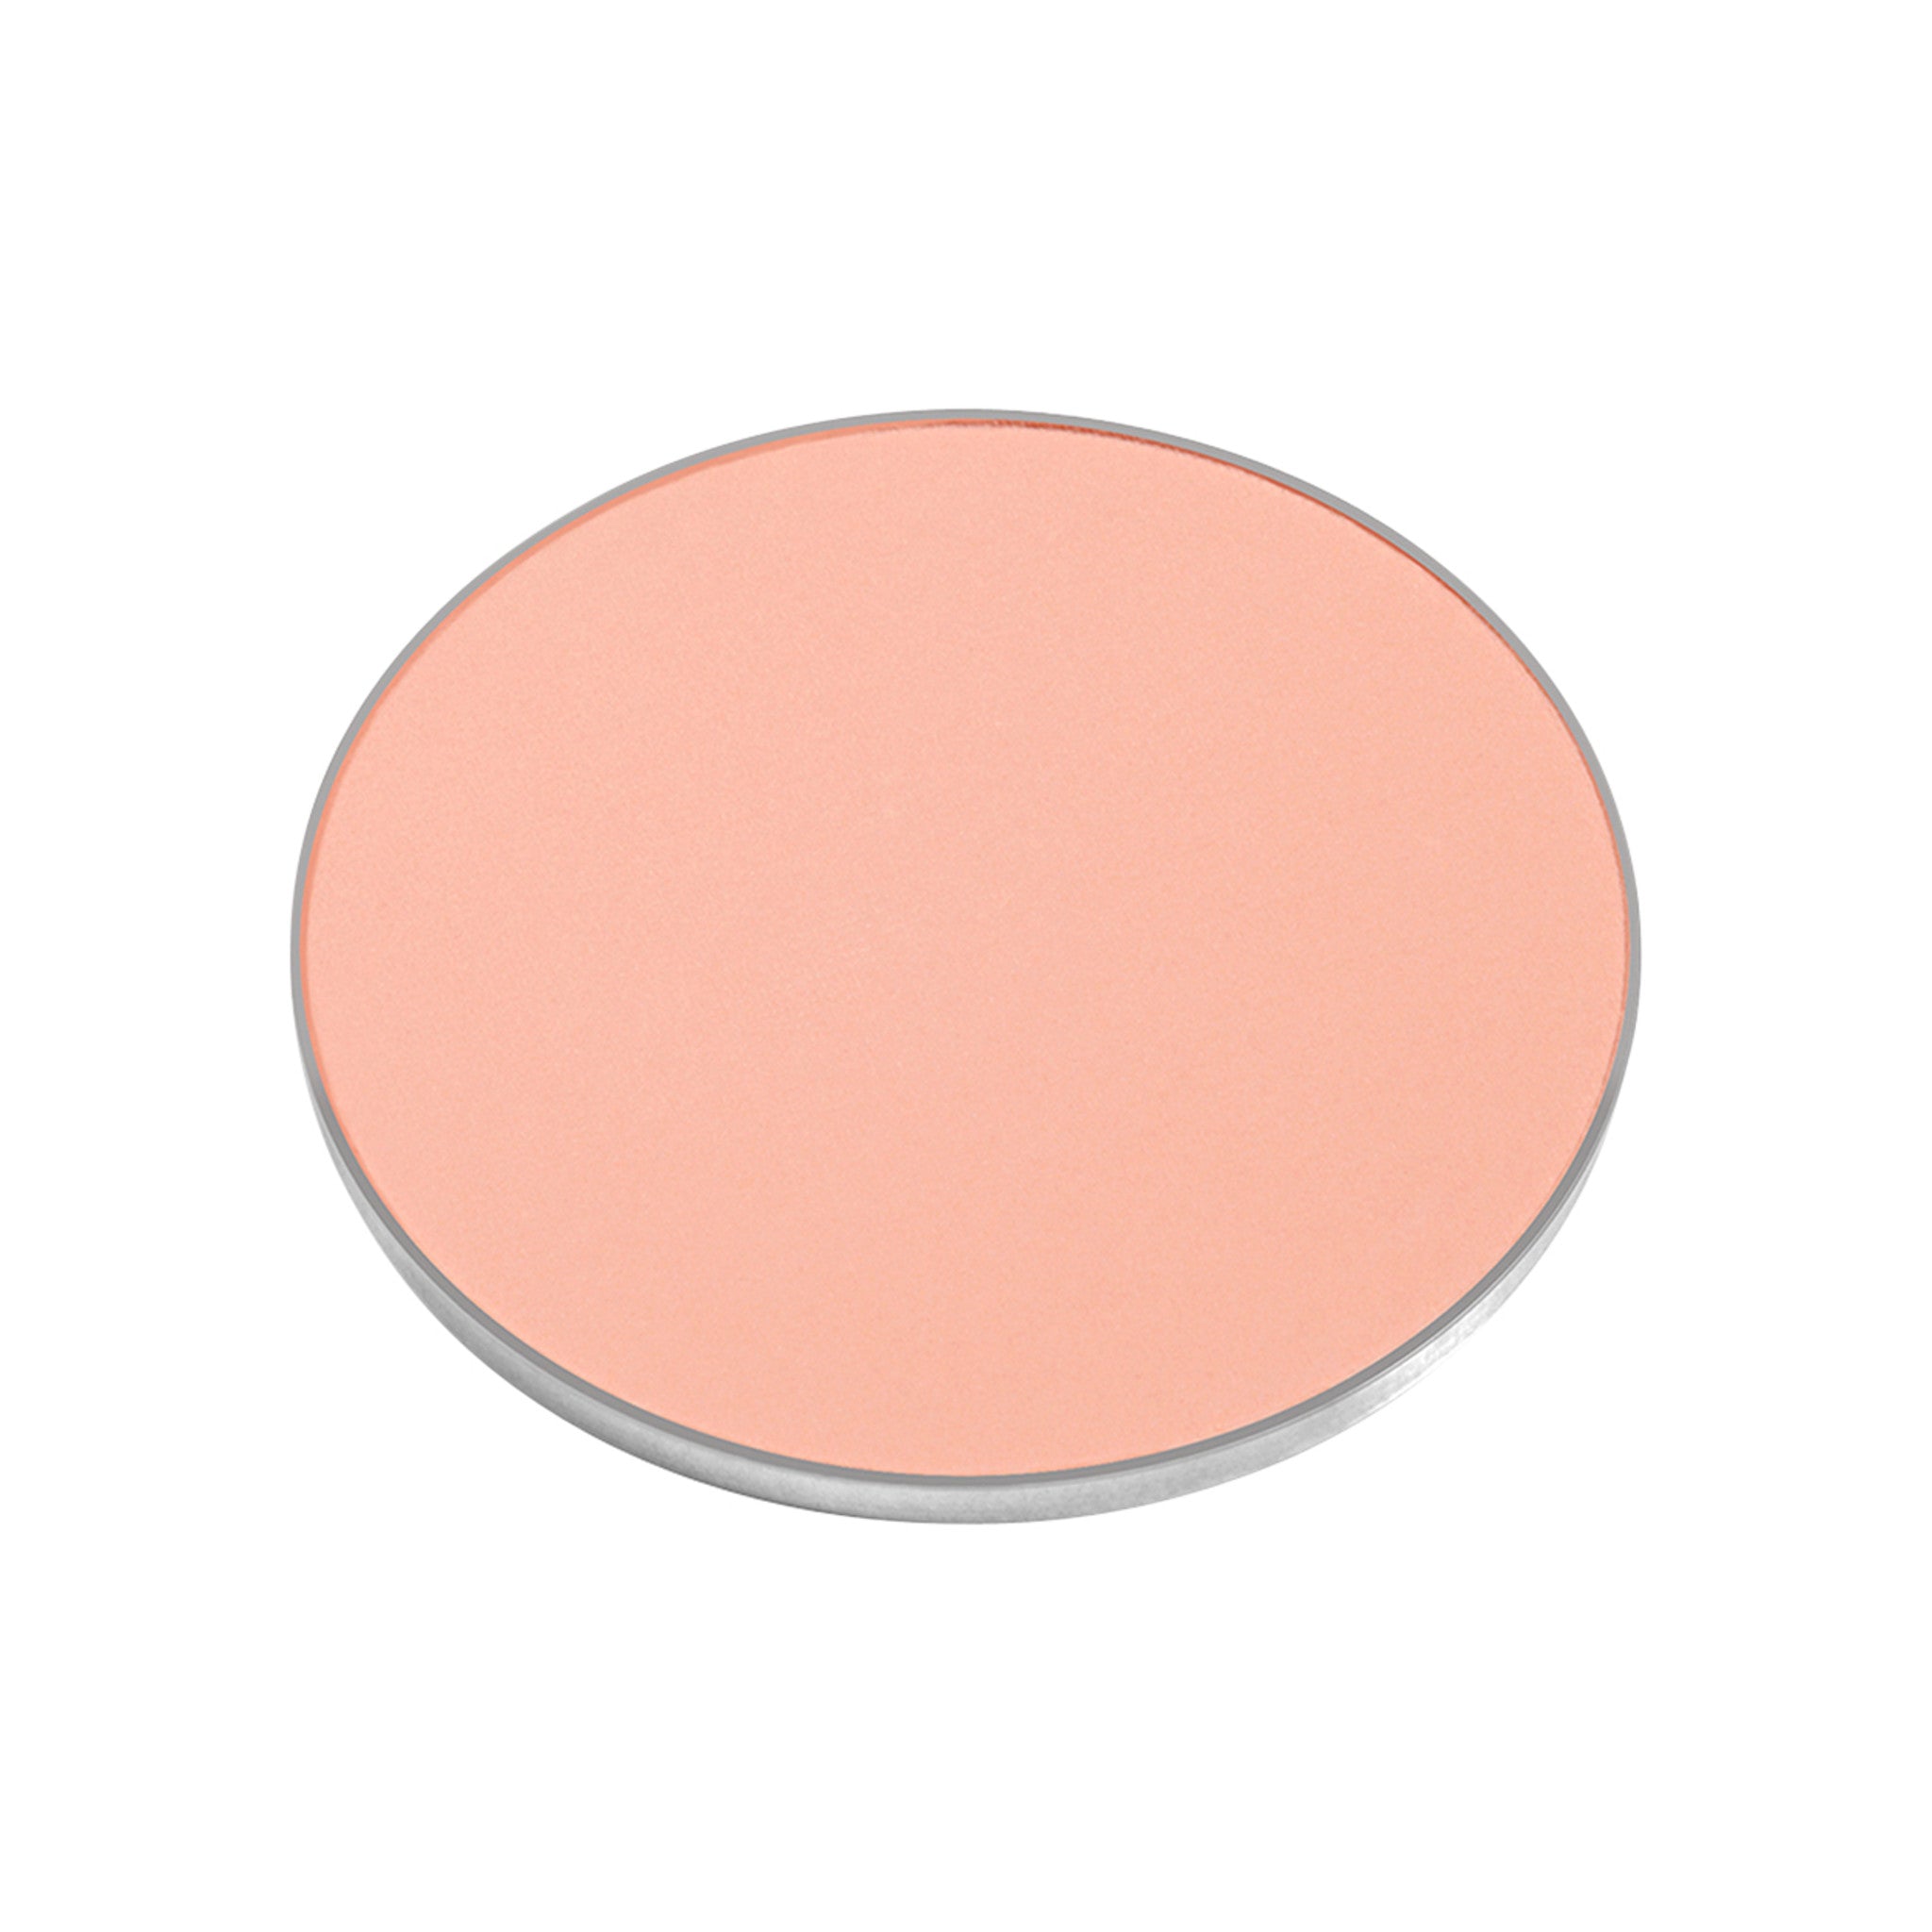 Chantecaille Eye Shade Refill Color/Shade variant: Ginger main image. This product is in the color pink